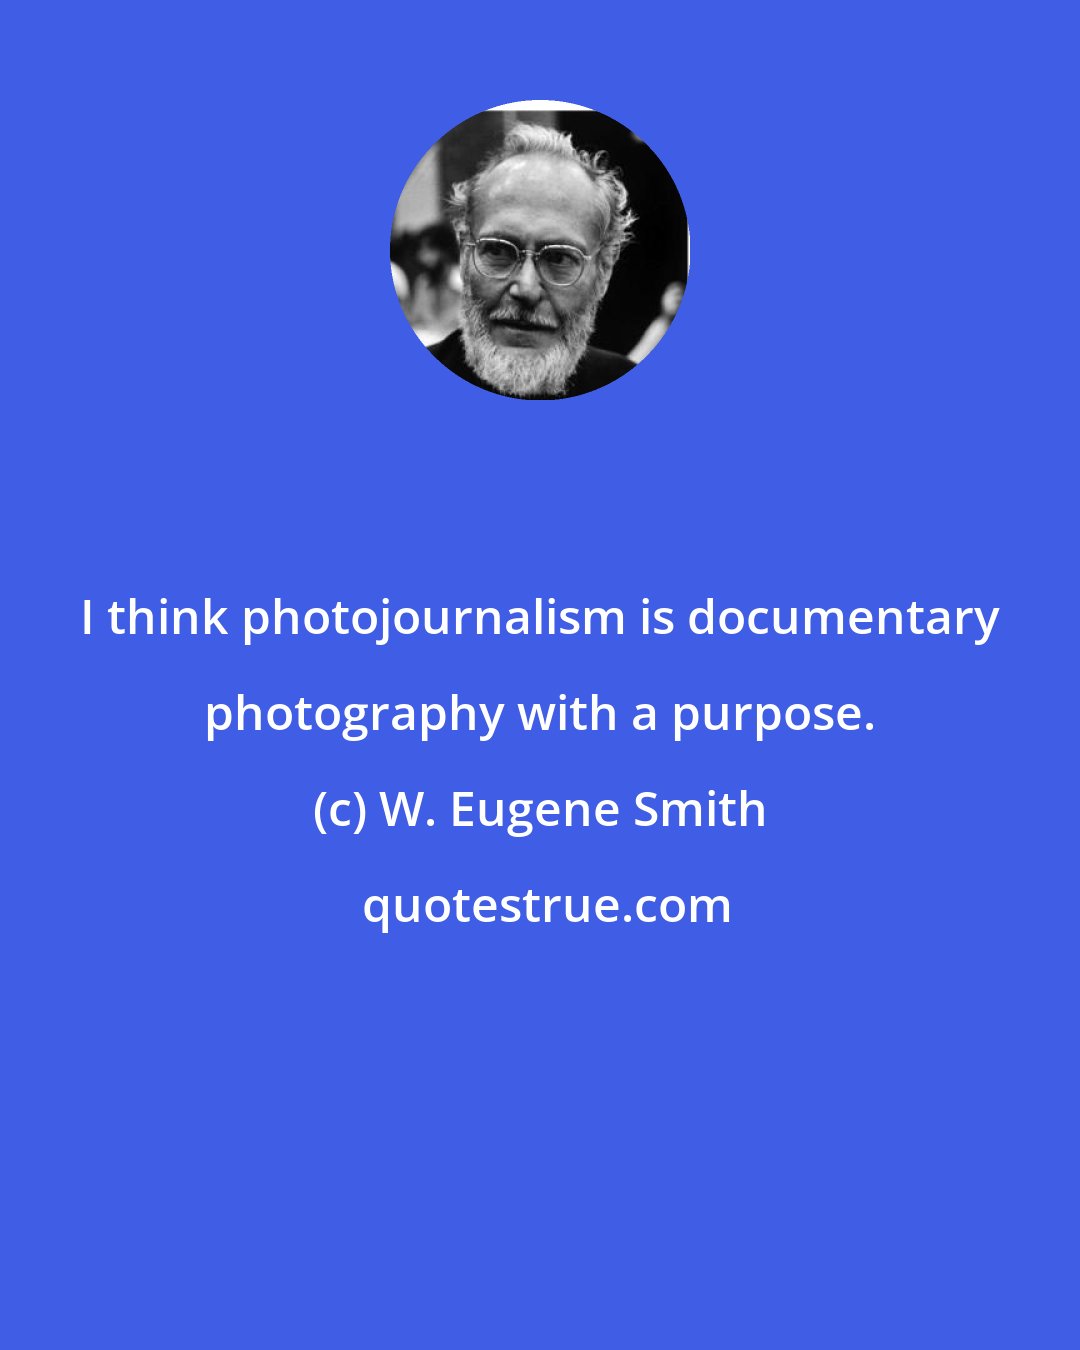 W. Eugene Smith: I think photojournalism is documentary photography with a purpose.